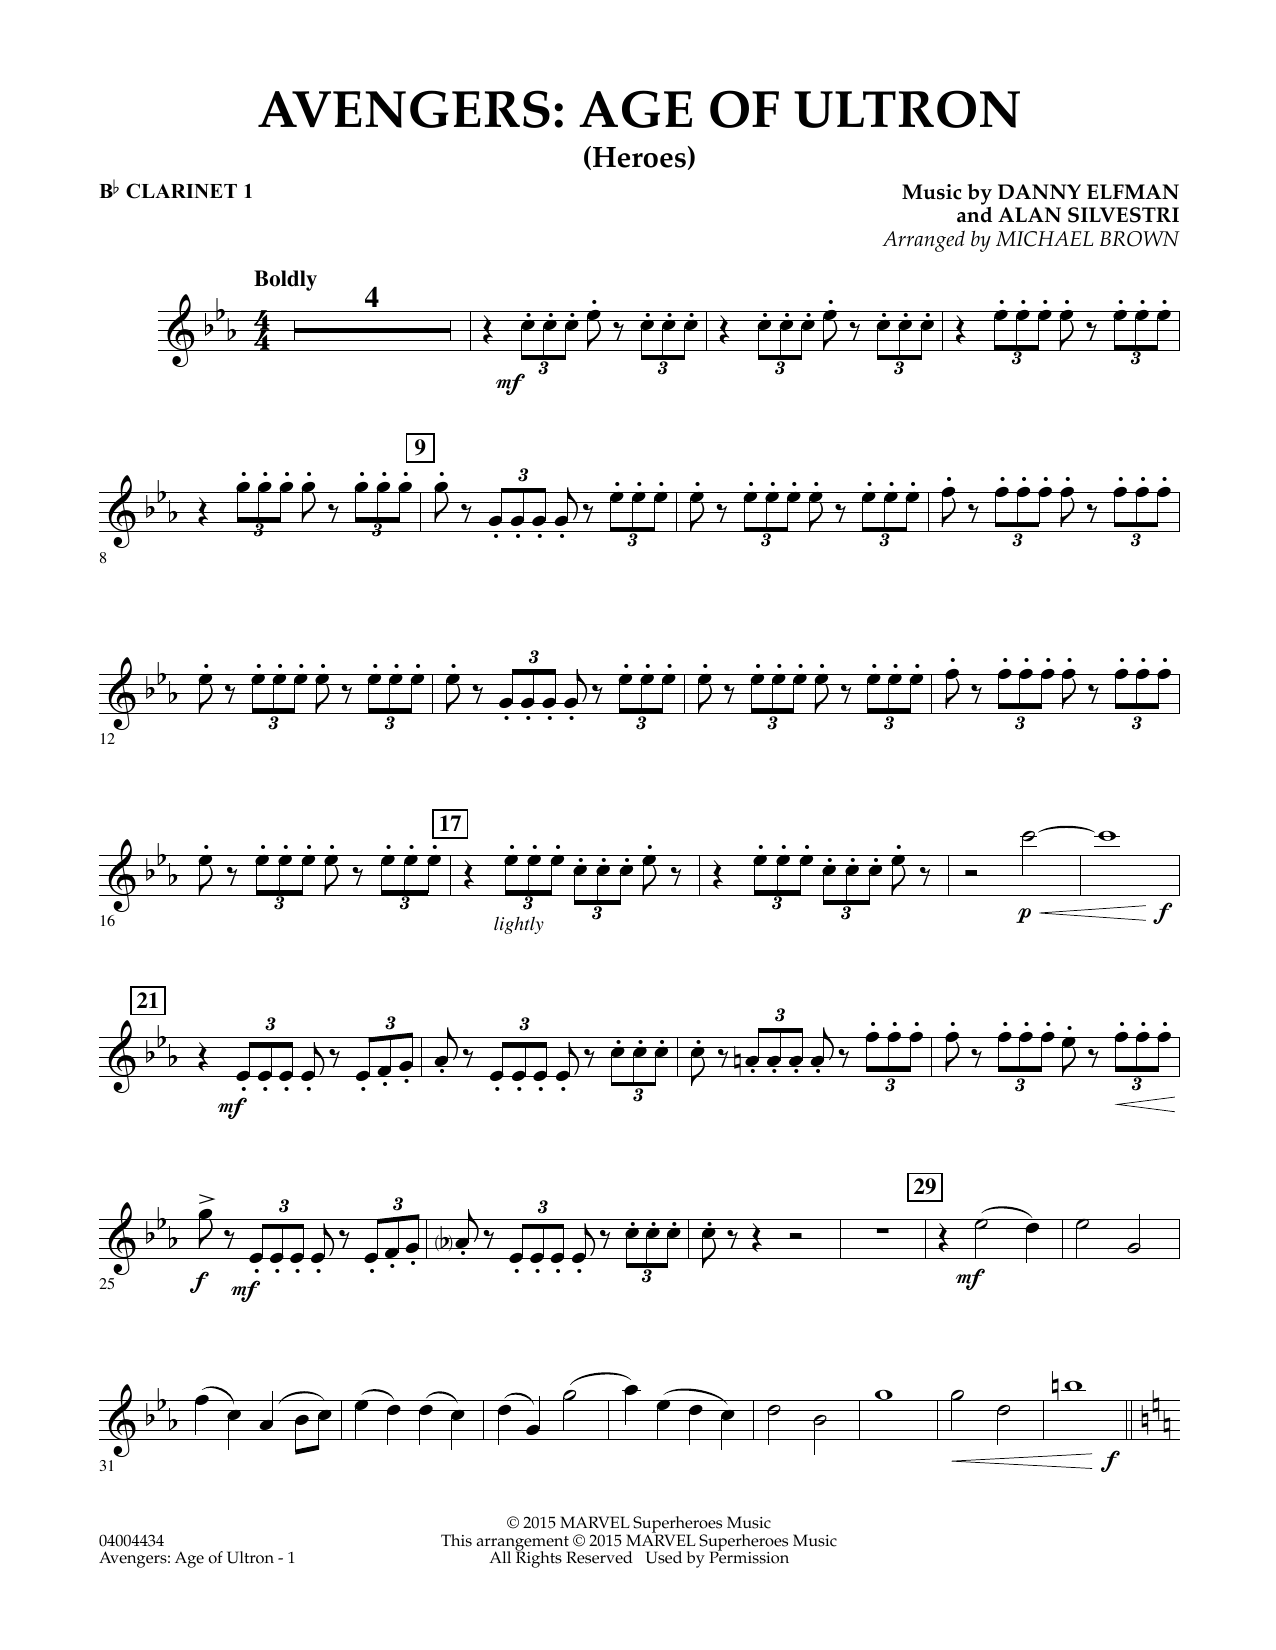 Michael Brown Avengers: The Age of Ultron (Main Theme) - Bb Clarinet 1 sheet music notes and chords. Download Printable PDF.